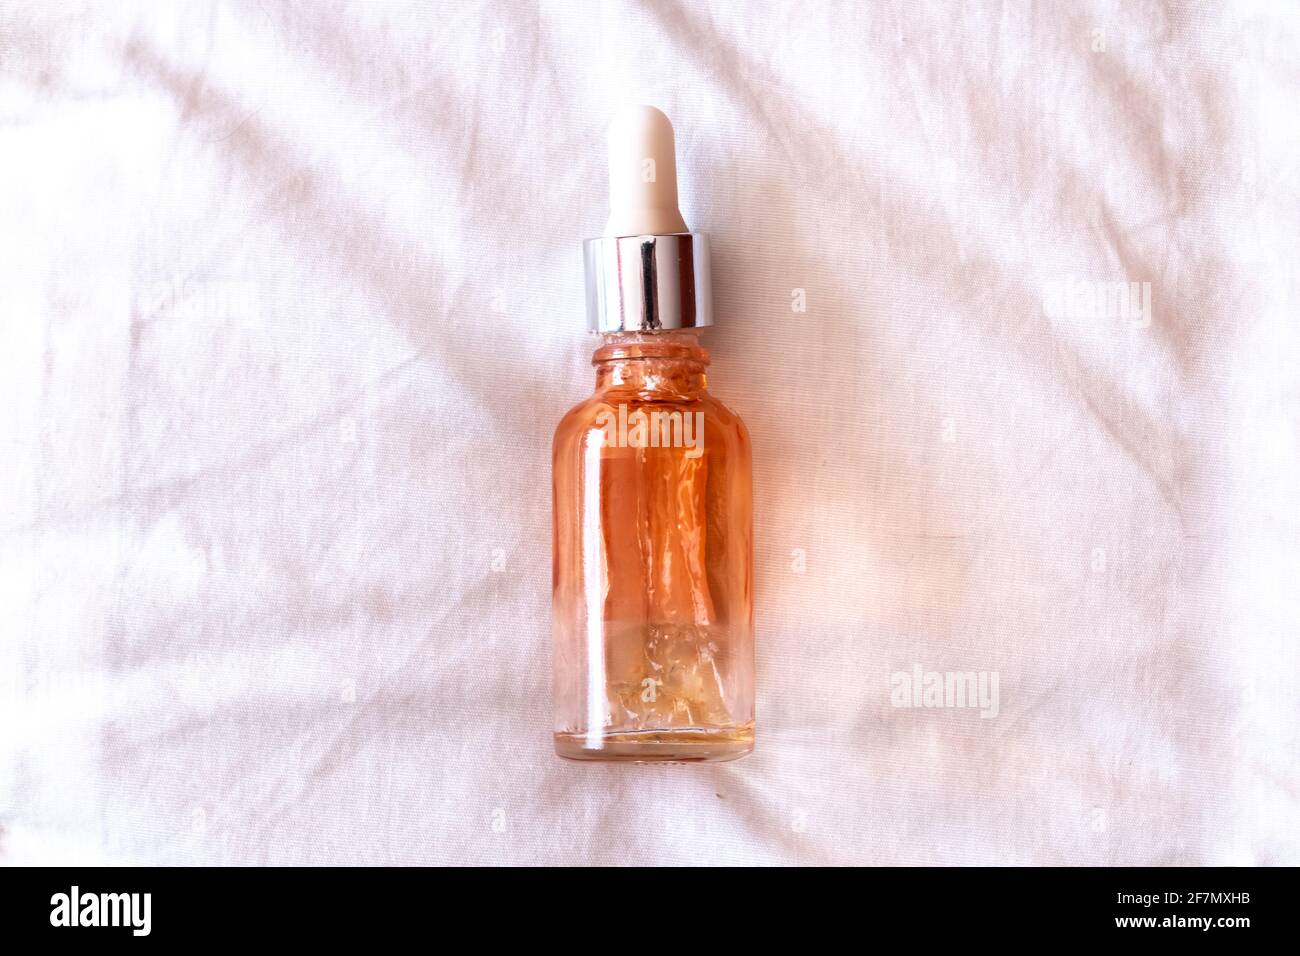 An empty serum bottle with an orange tint and white dropper head, slightly unscrewed, on a white fabric, isolated, in Canada during the wintertime. Stock Photo